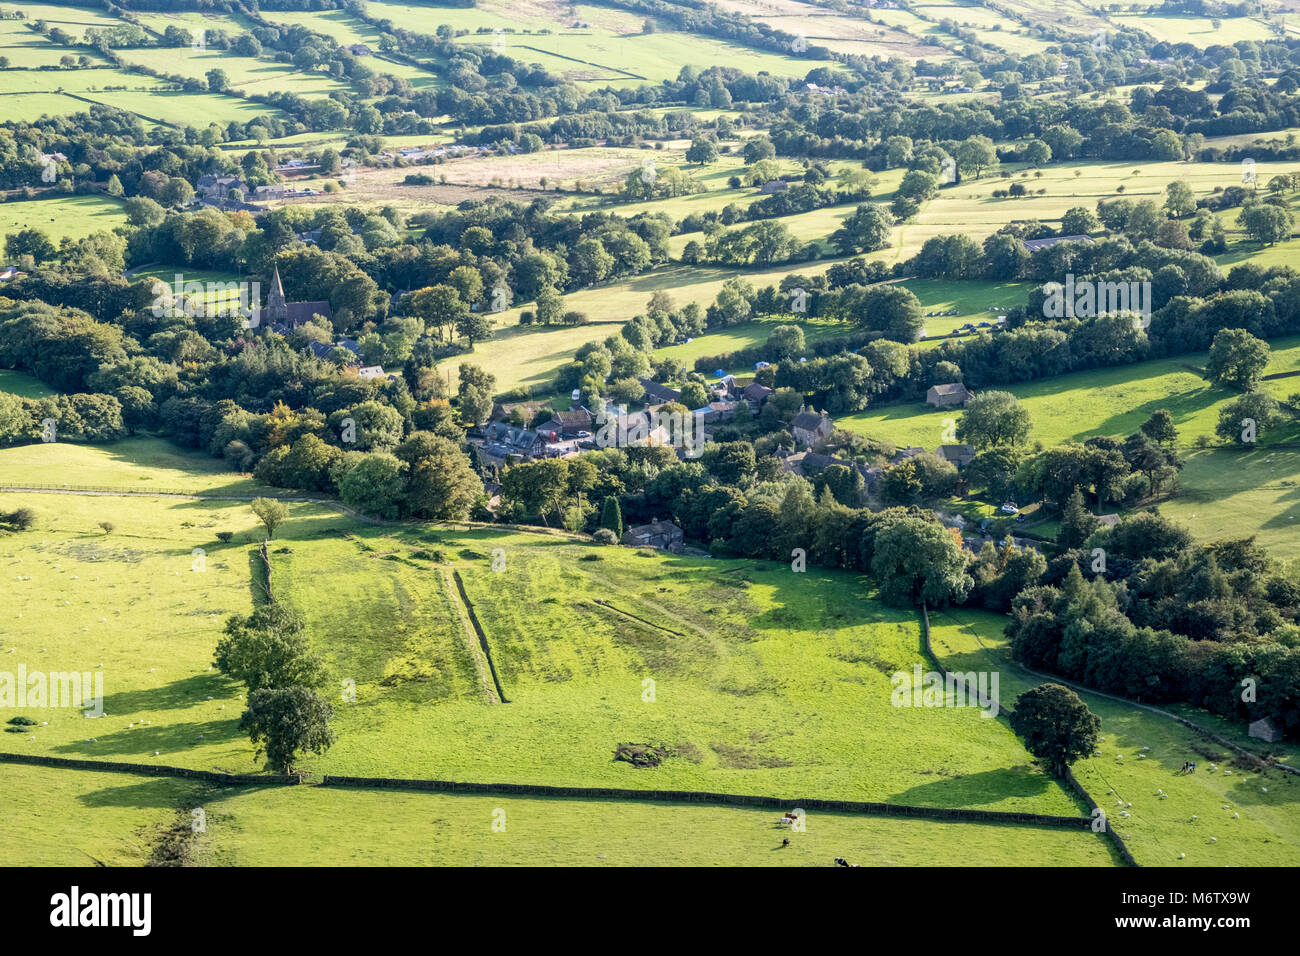 Village of Edale and the surrounding countryside seen from above. The Vale of Edale, Derbyshire, Peak District National Park, England, UK Stock Photo